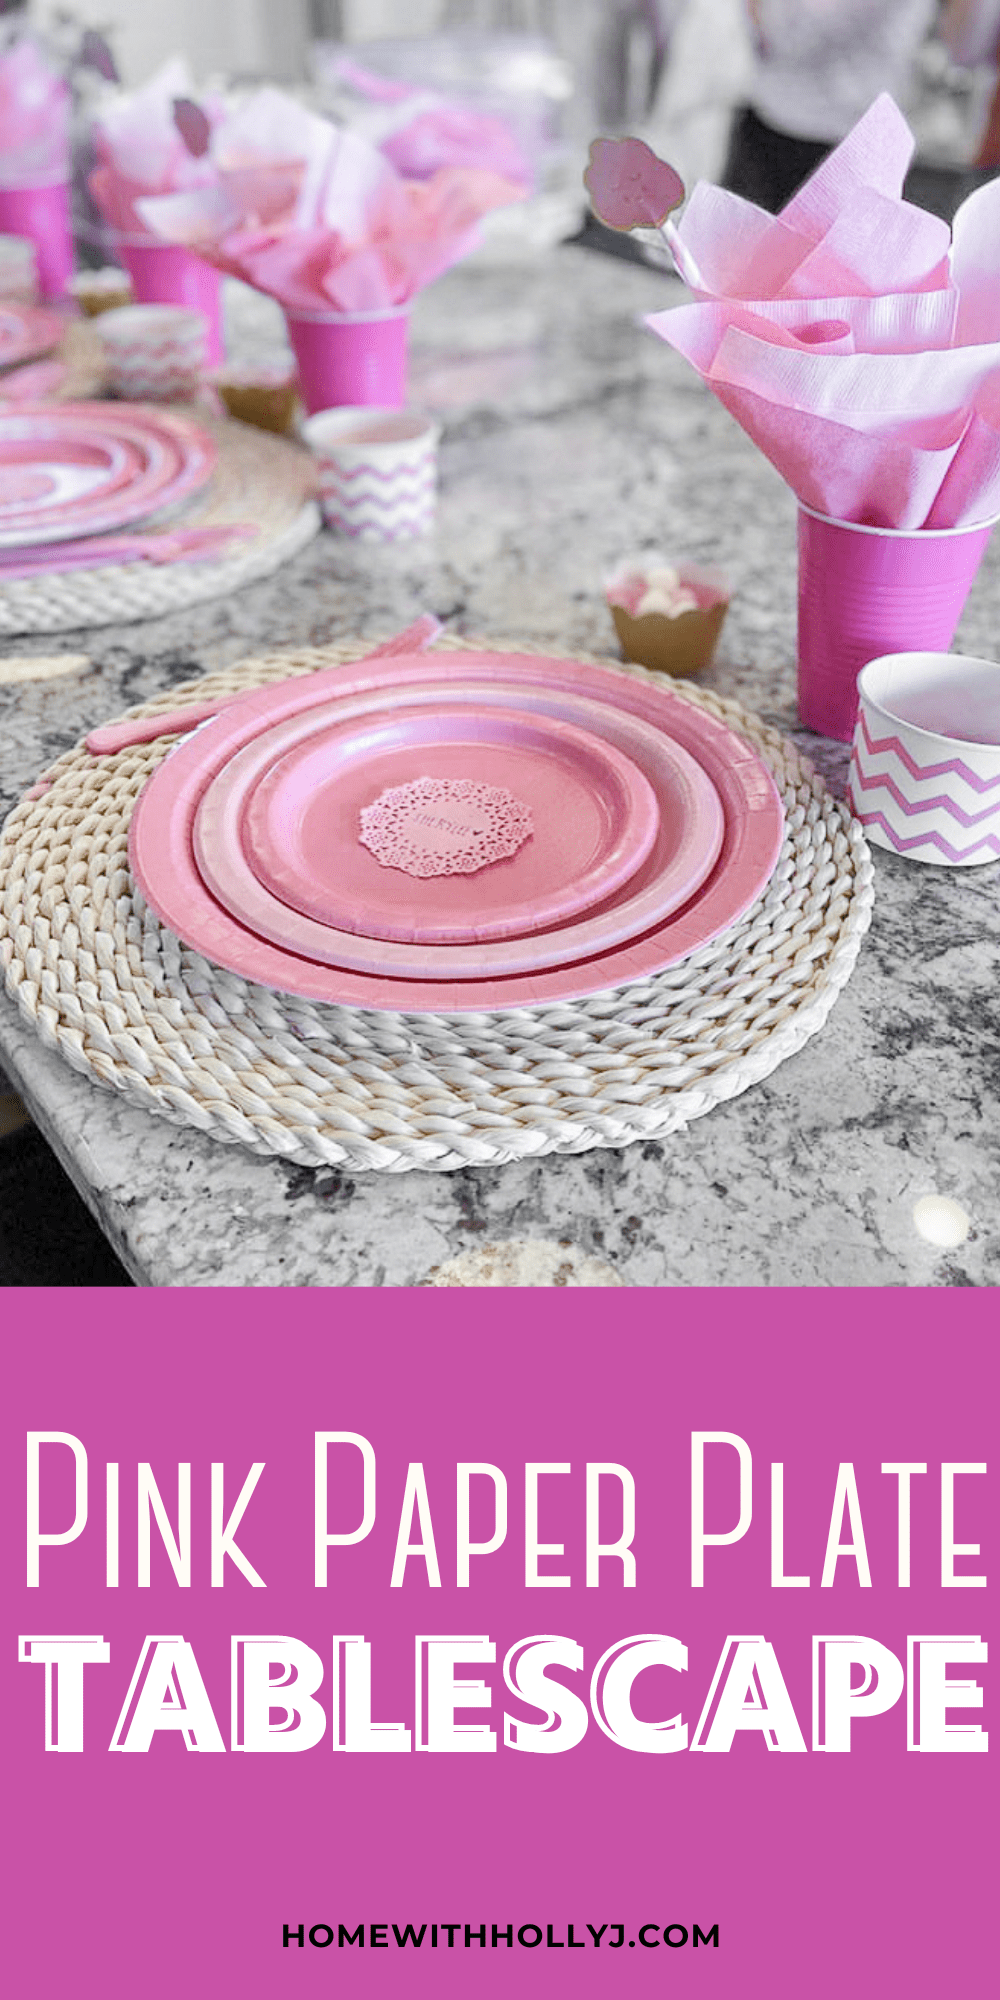 You don't need fancy china to set a beautiful table. Elevate our dining experience with a pink paper plate tablescape. Check it out now.